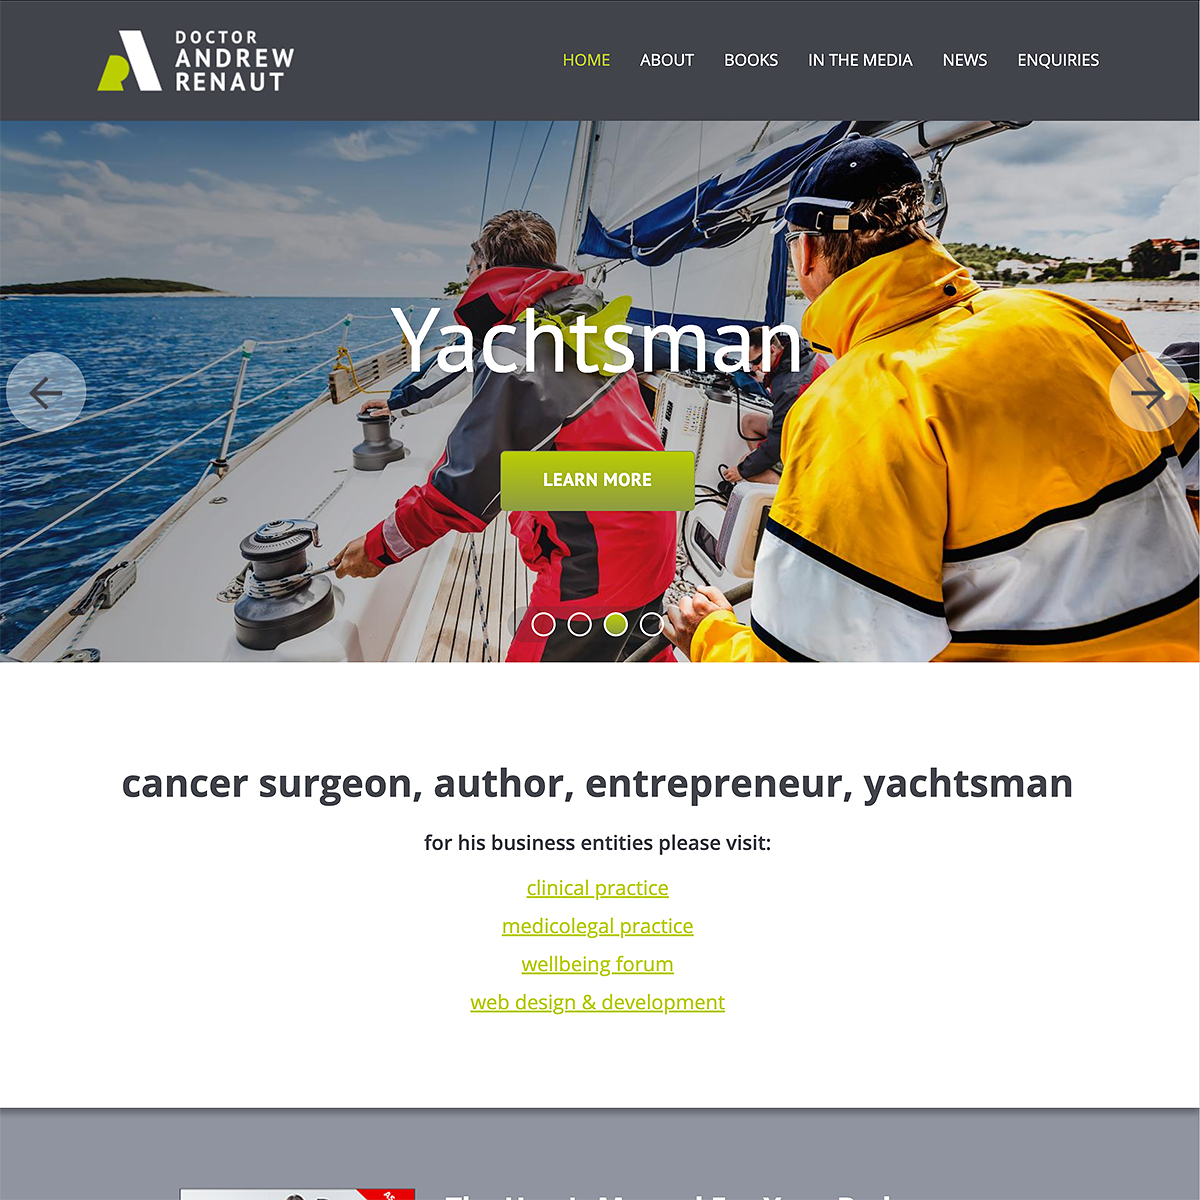 Dr Andrew Renaut - Homepage Banner - Yachtsman